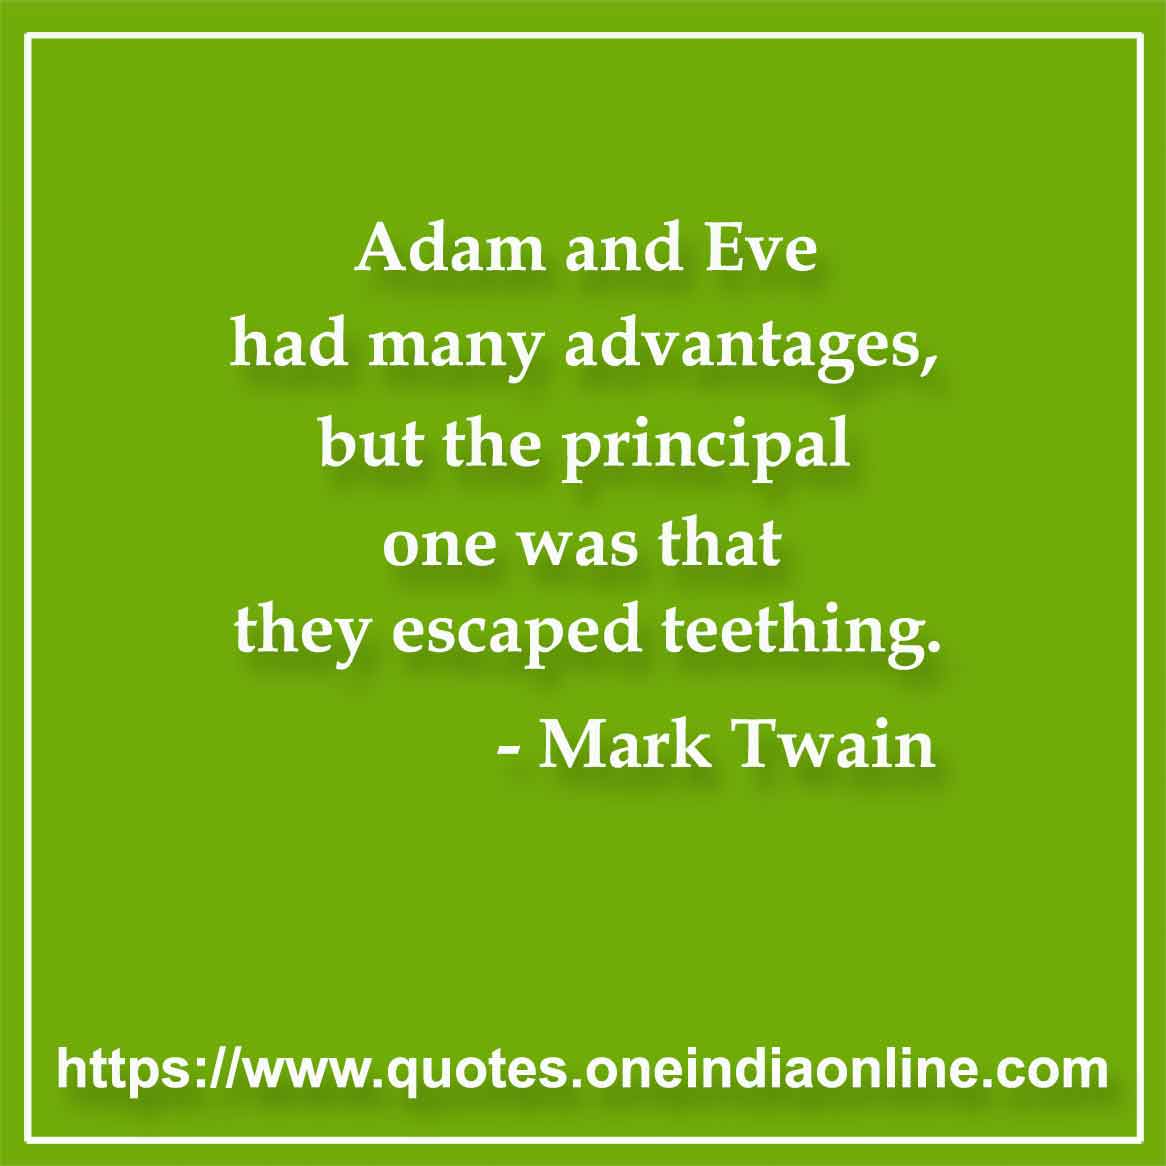 Adam and Eve had many advantages, but the principal one was that they escaped teething.

- Mark Twain